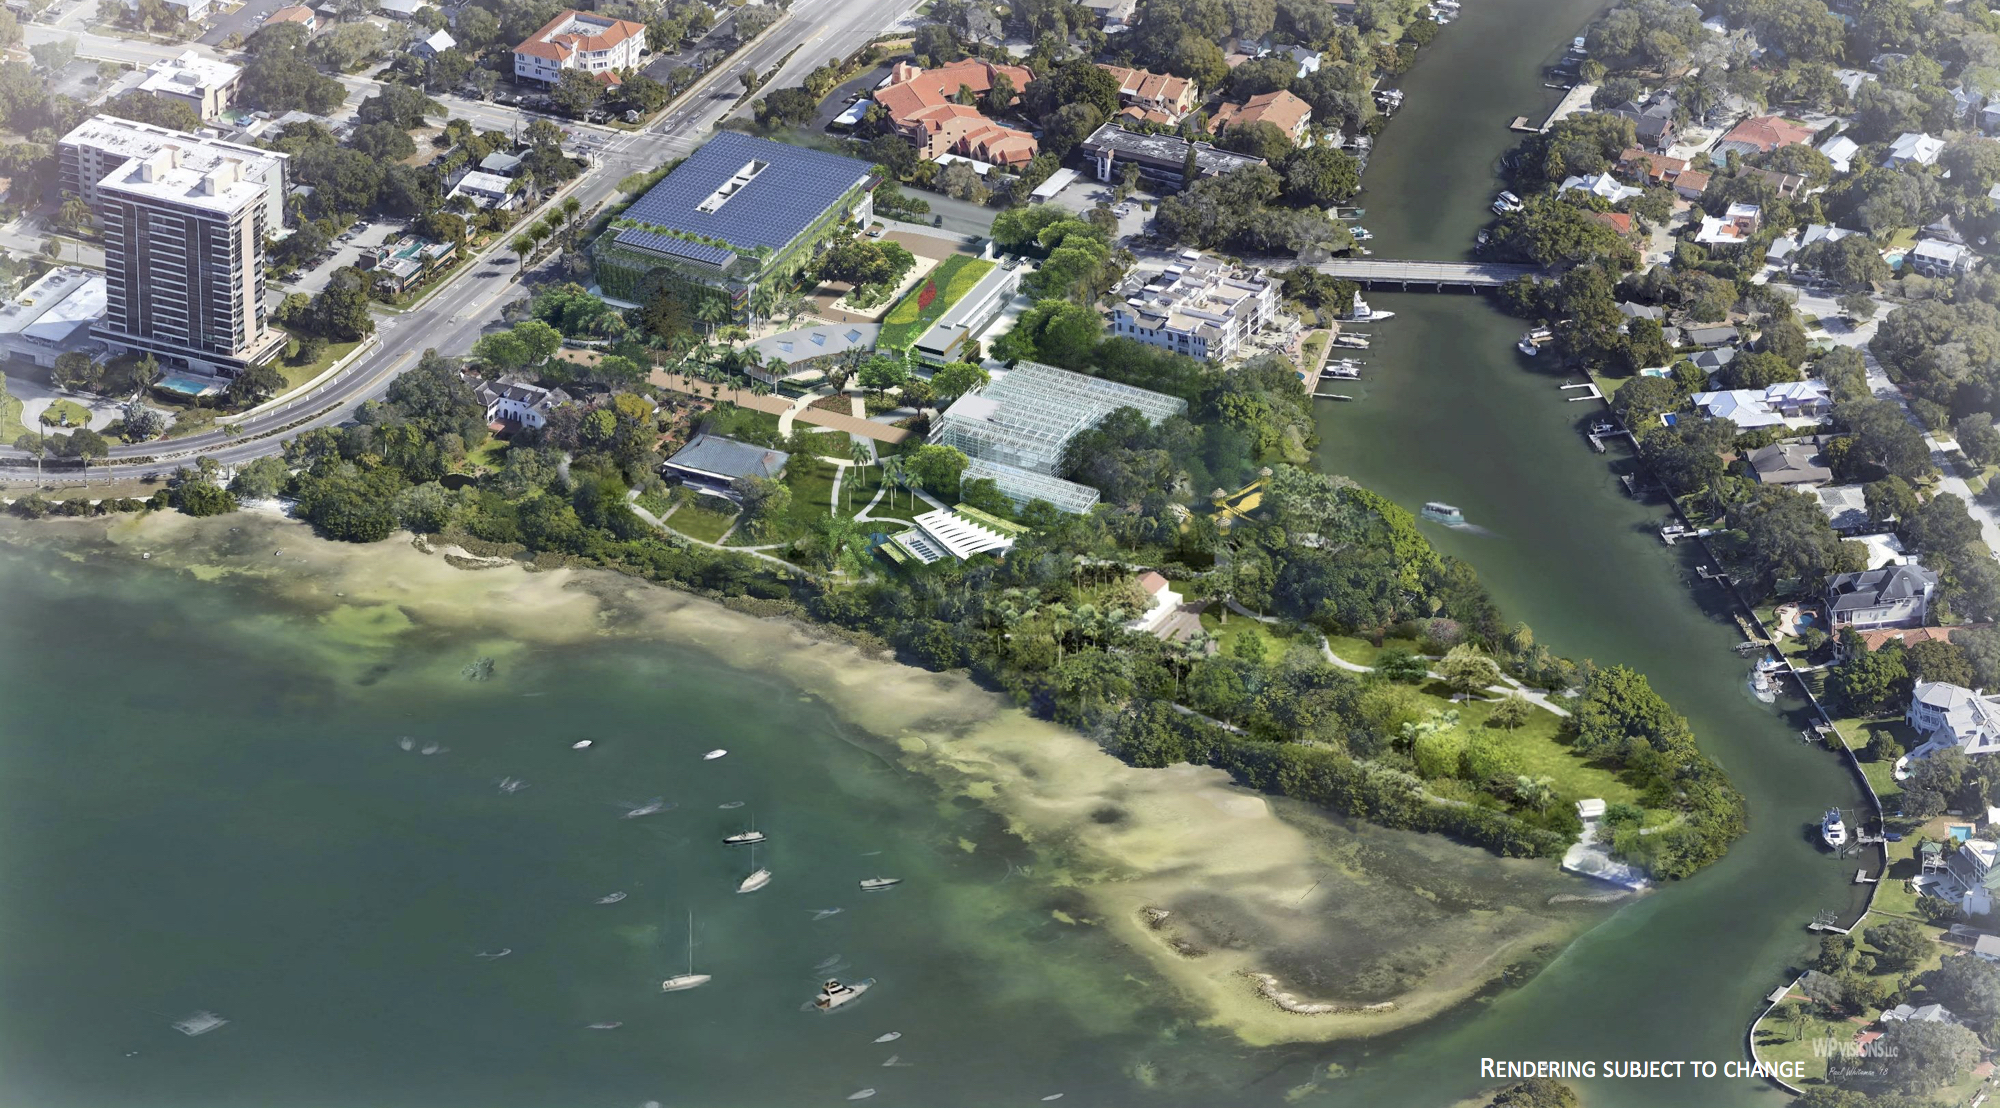 Selby Gardens is revising its original master plan, depicted in this concept image. Although the initial master plan was controversial, Selby leaders hope the new proposal will garner broad support.